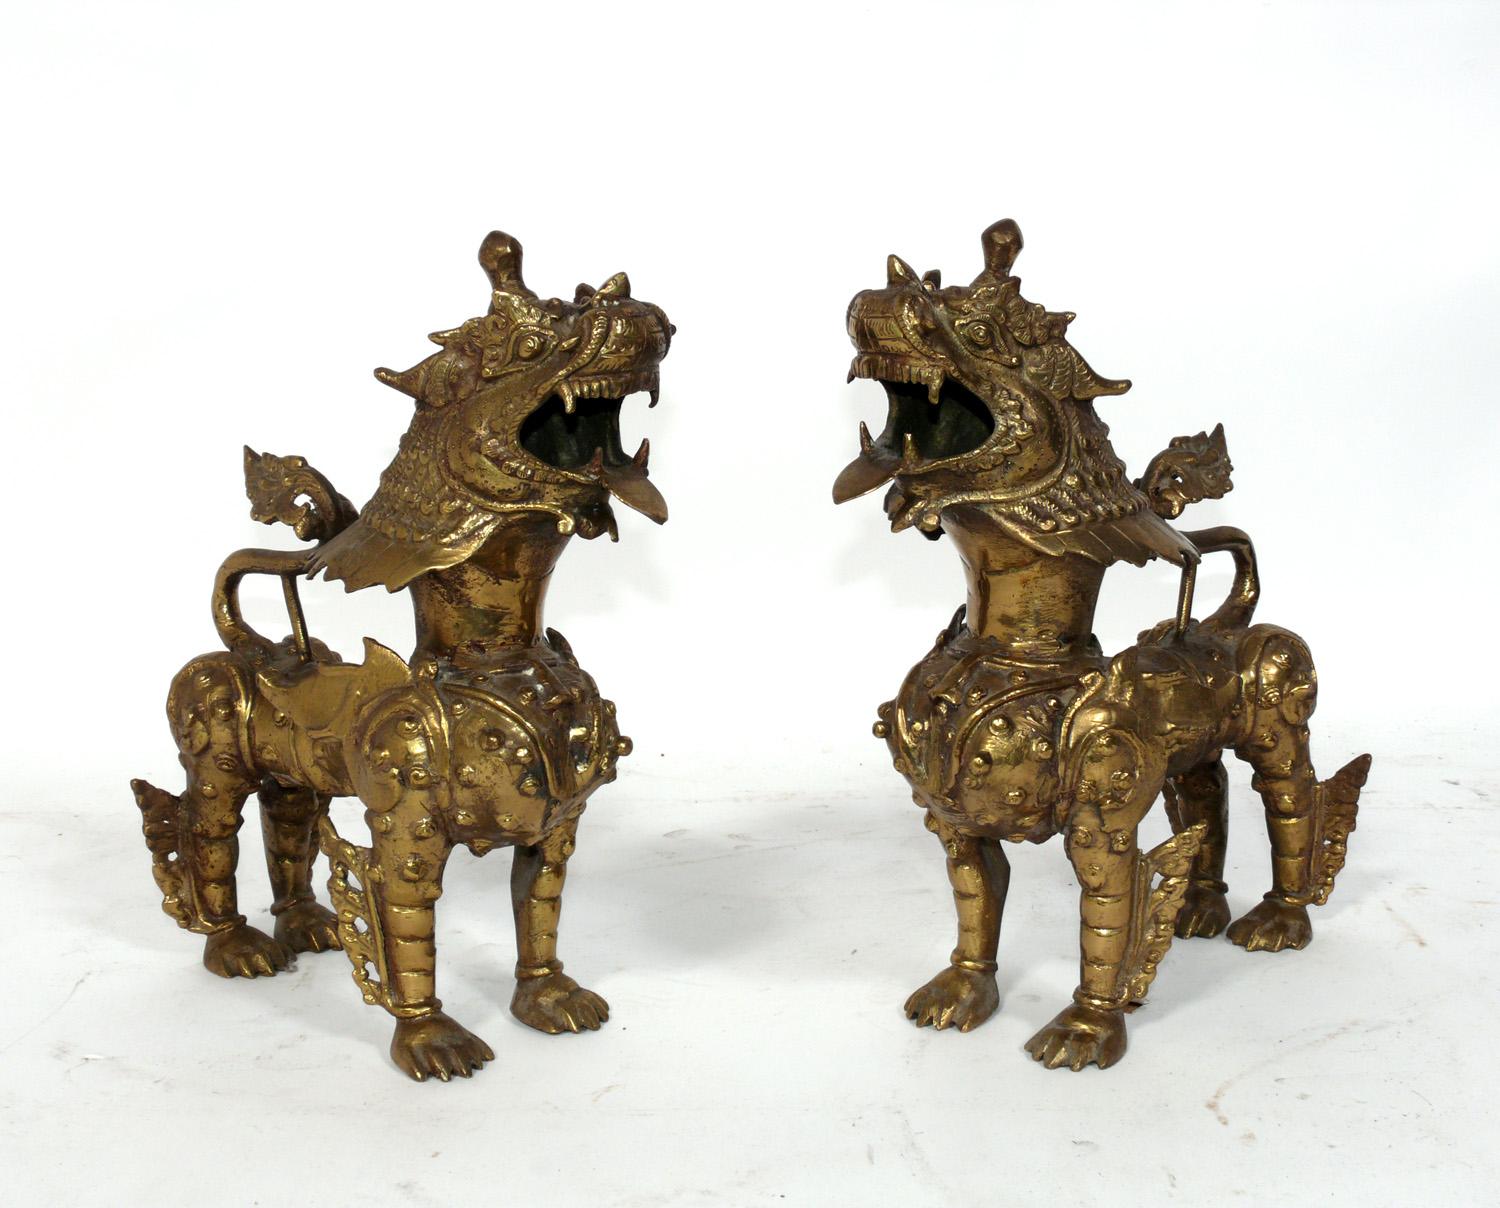 Pair of Asian Bronze Foo Dogs or Kylin Dragon, probably Tibetan, circa 1940s or earlier. They retain their warm original patina. These were purchased from the Manhattan estate of a Japanese American that traveled extensively through Asia in the